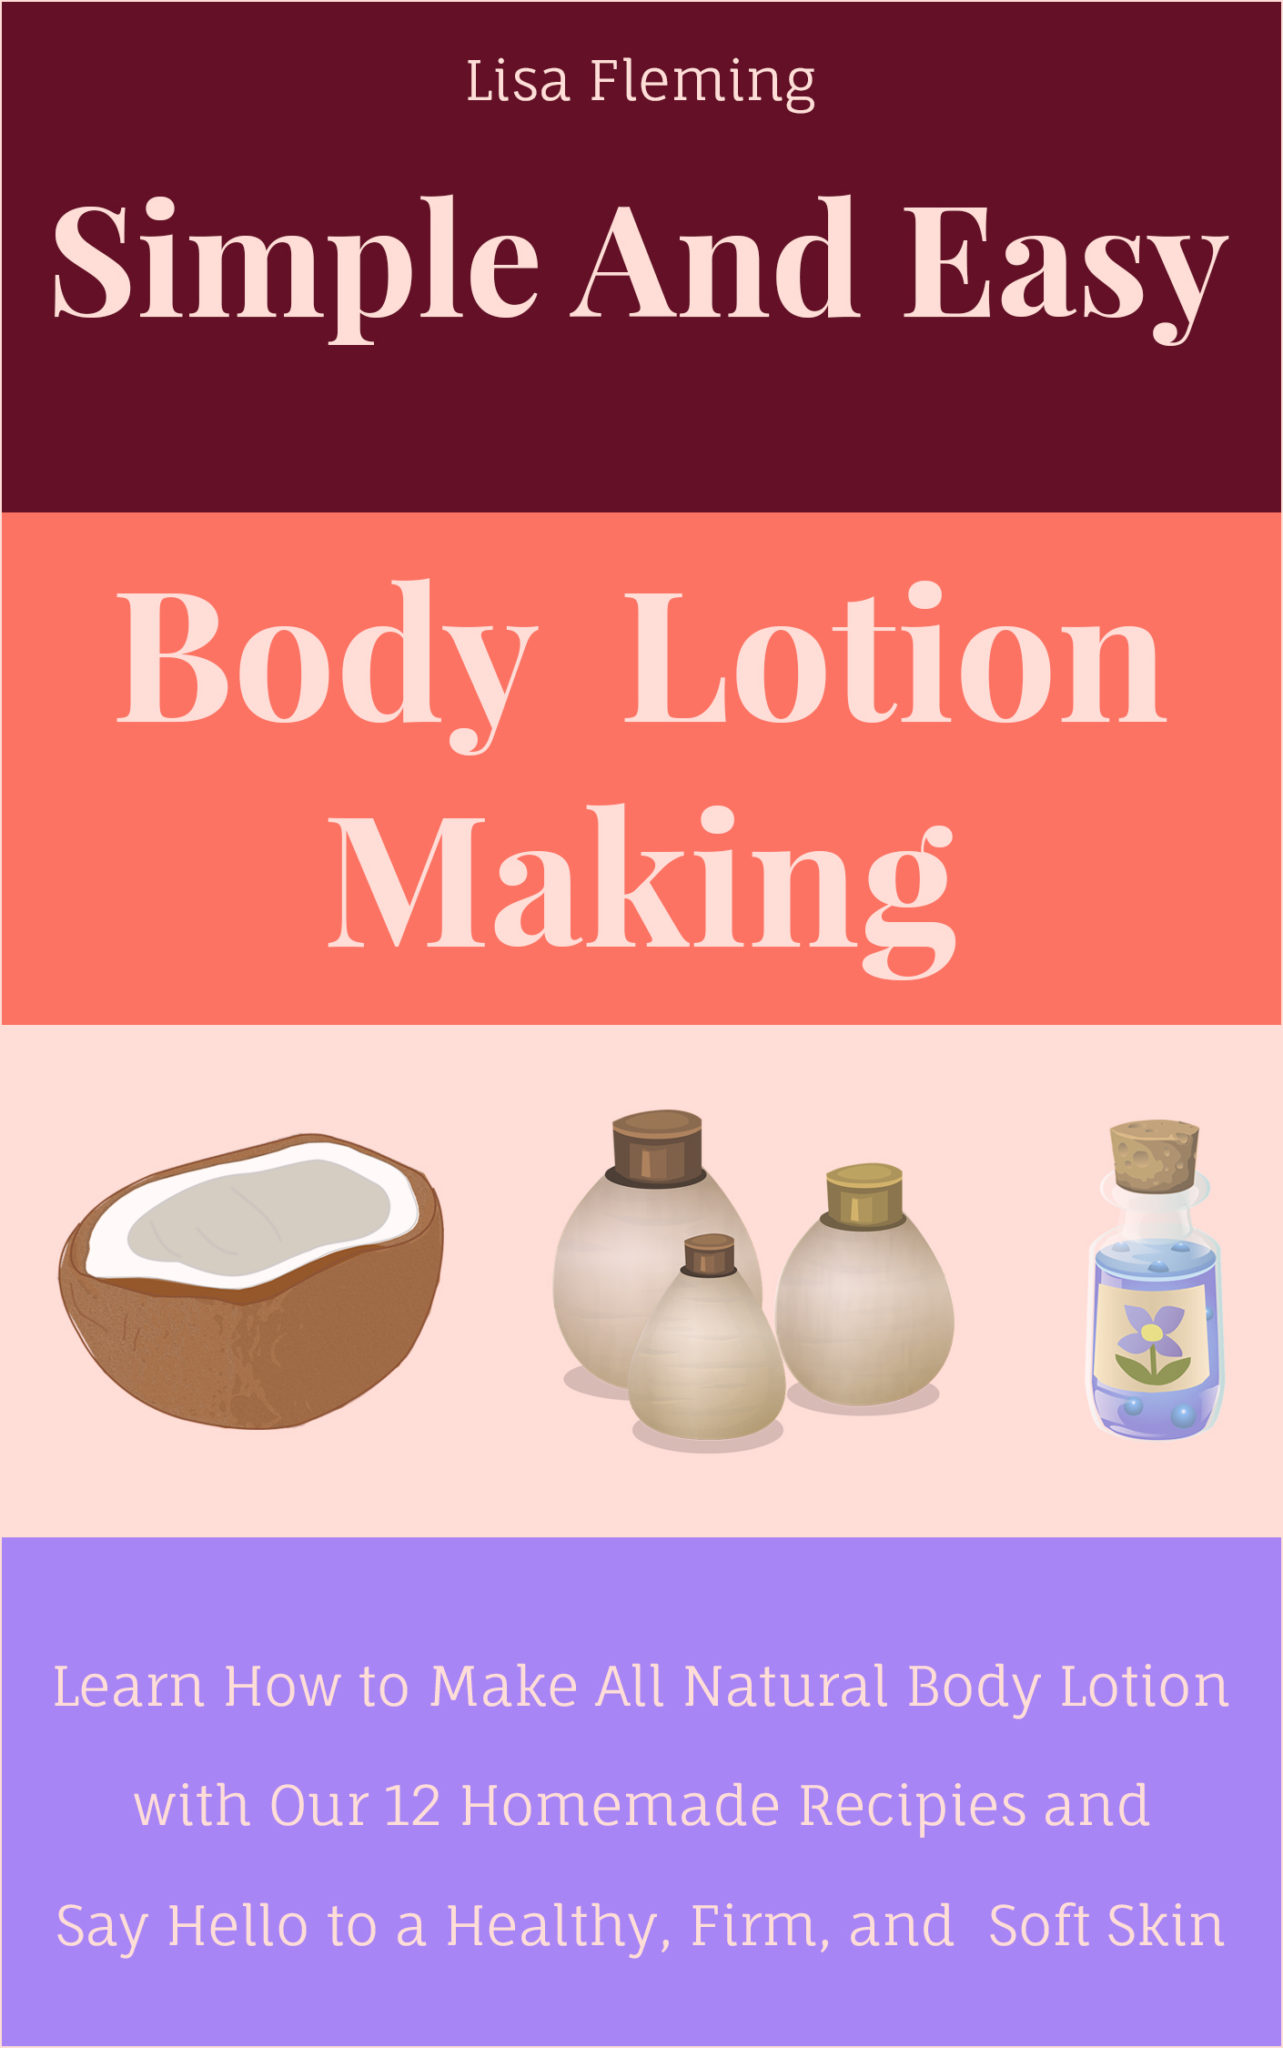 FREE: Simple and Easy Body Lotion Making: Learn How to Make All Natural Body Lotion with Our 12 Homemade Recipes and Say Hello to a Healthy, Firm and Soft Skin by Lisa Fleming